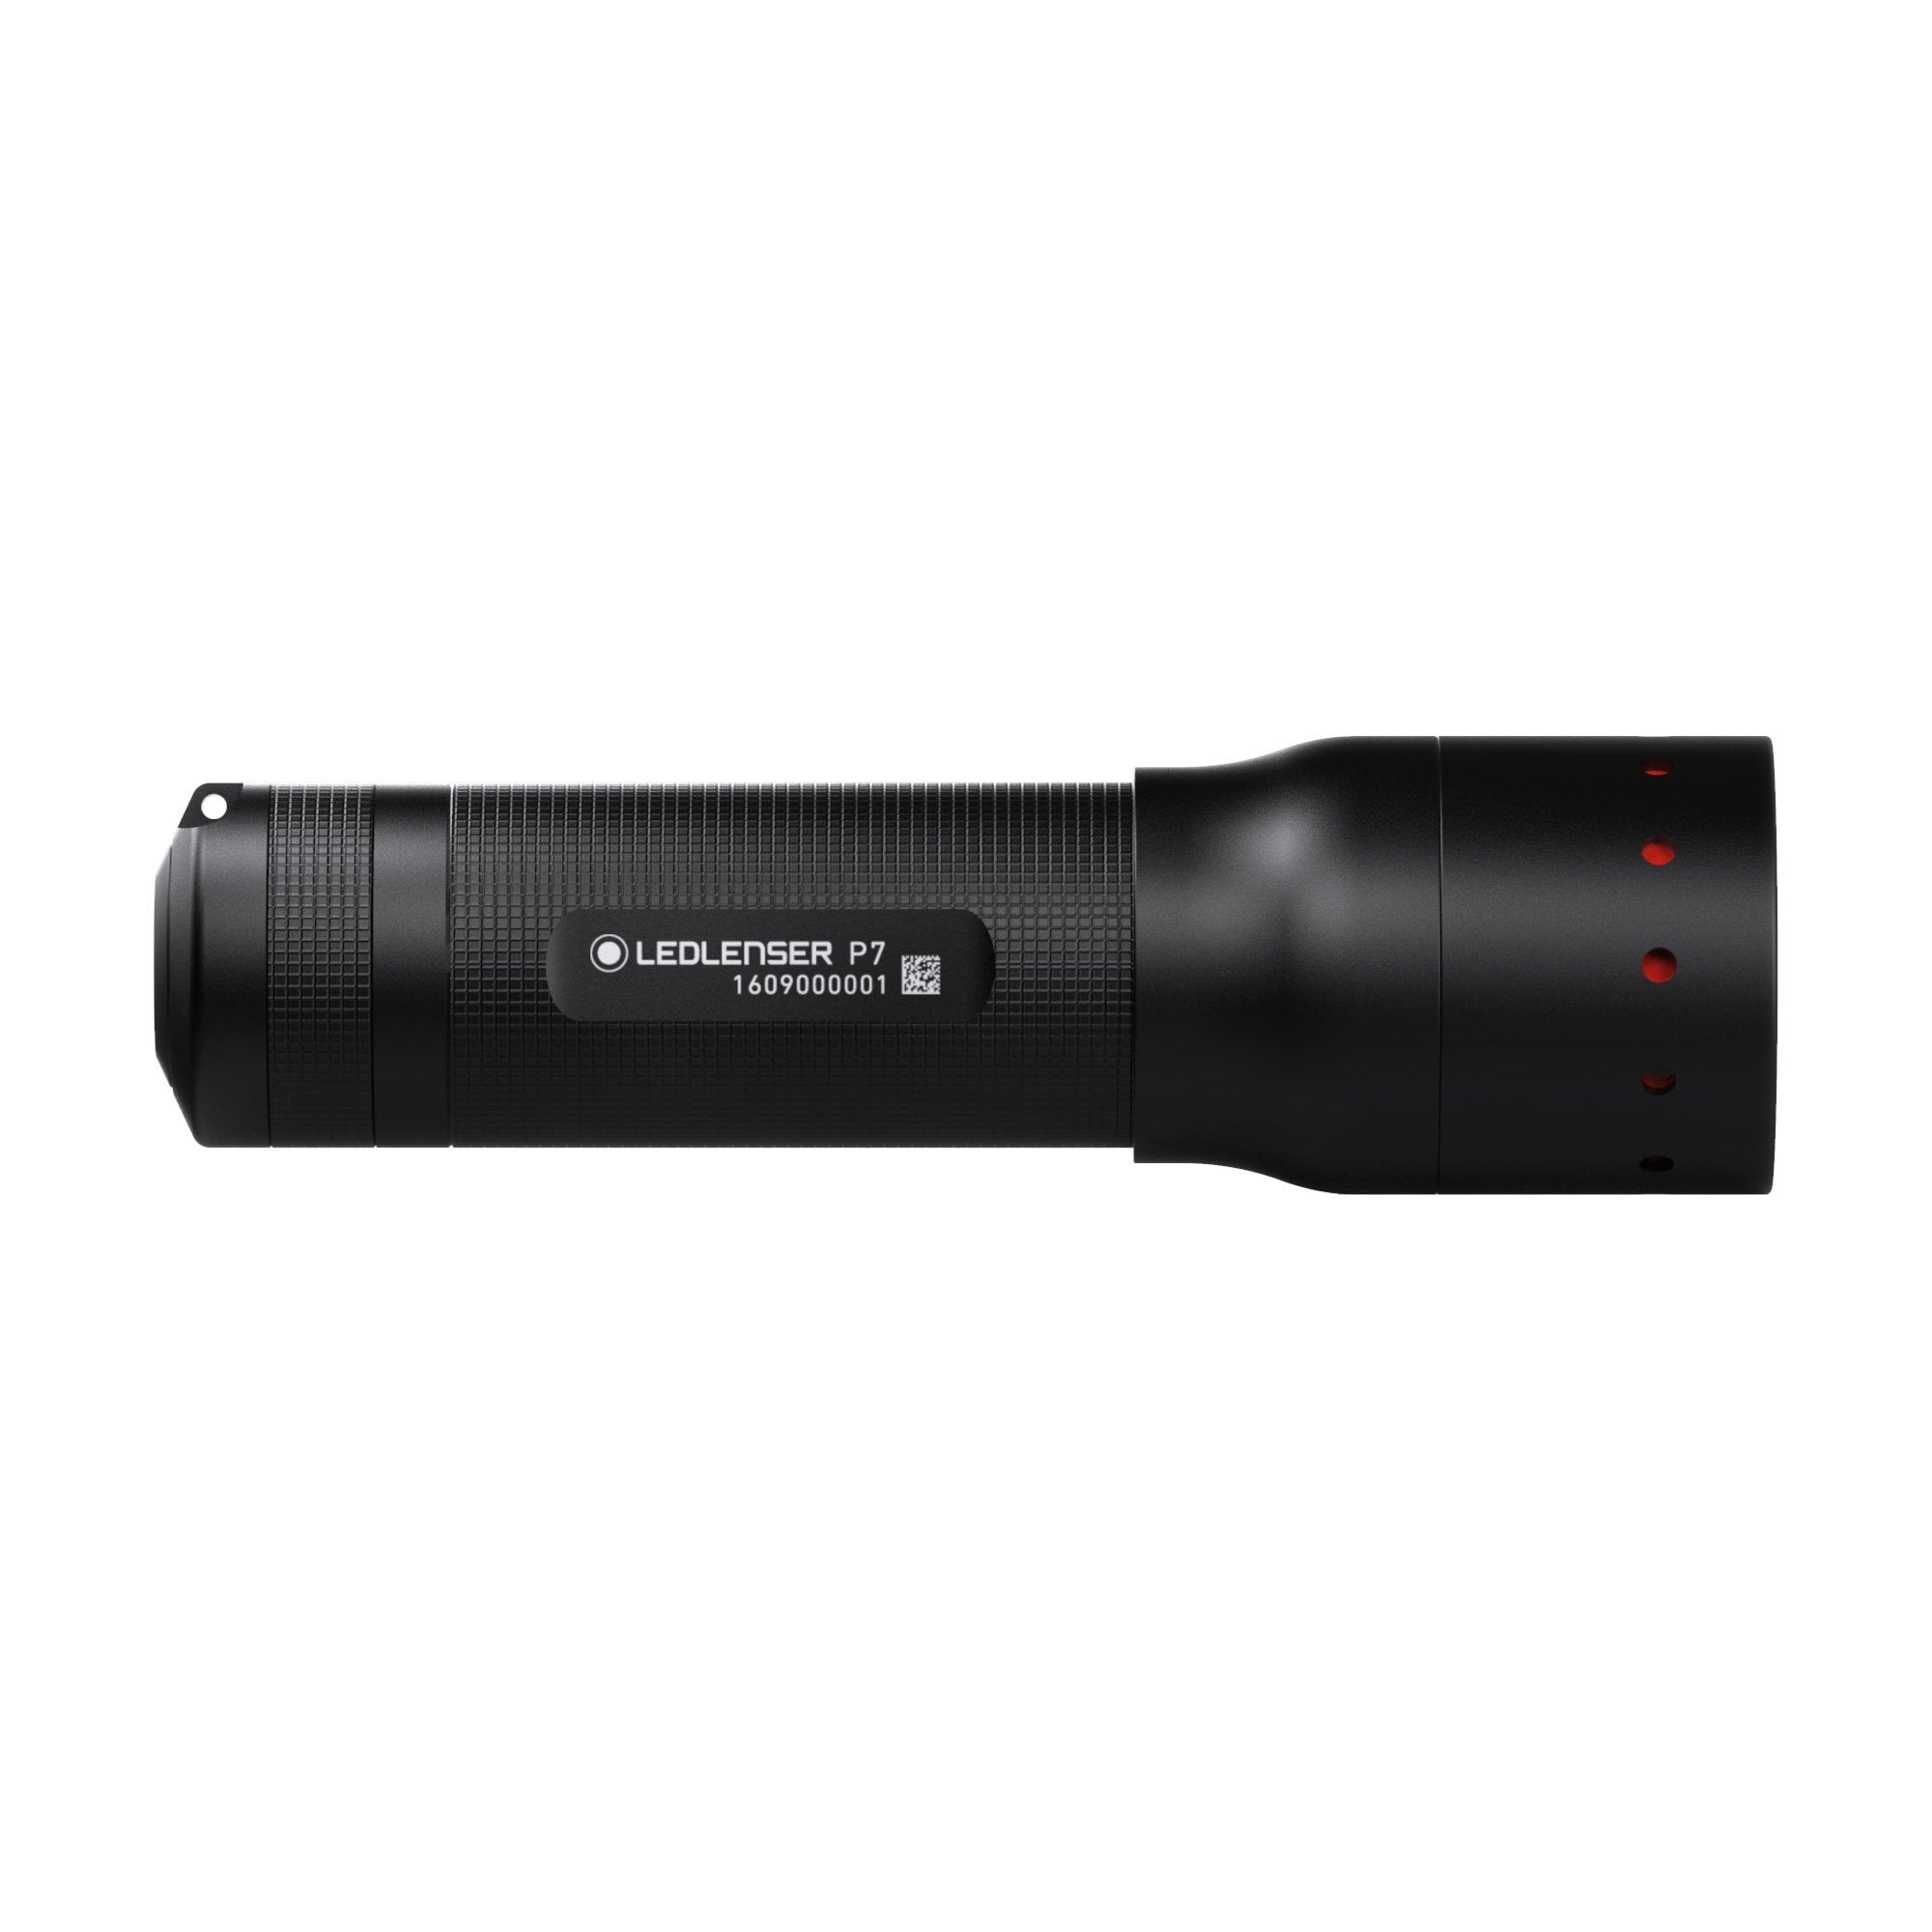 P7 Battery Operated Torch